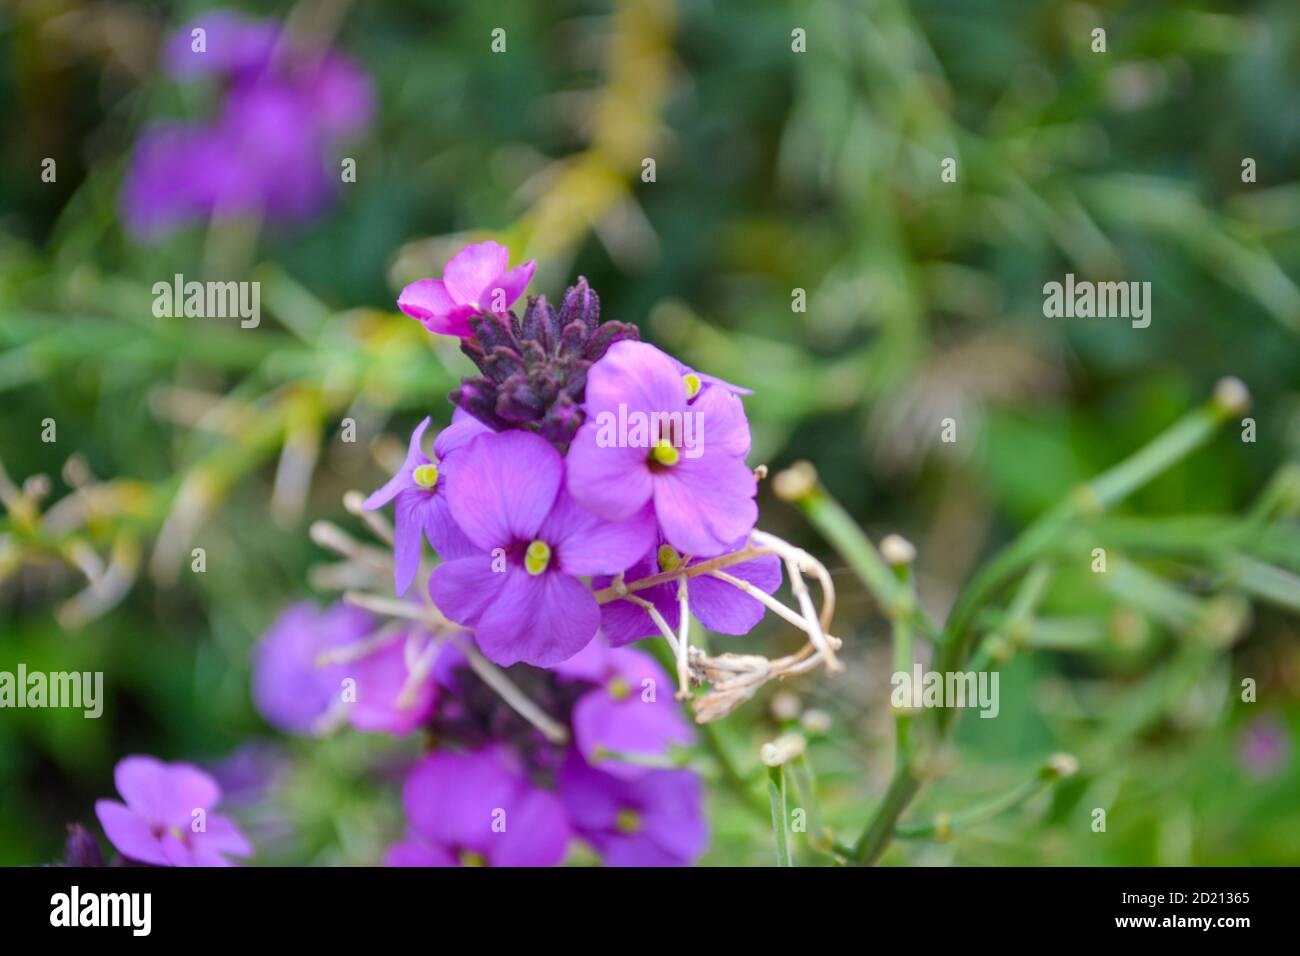 Close up photo of beautiful pink and purple flowers Stock Photo